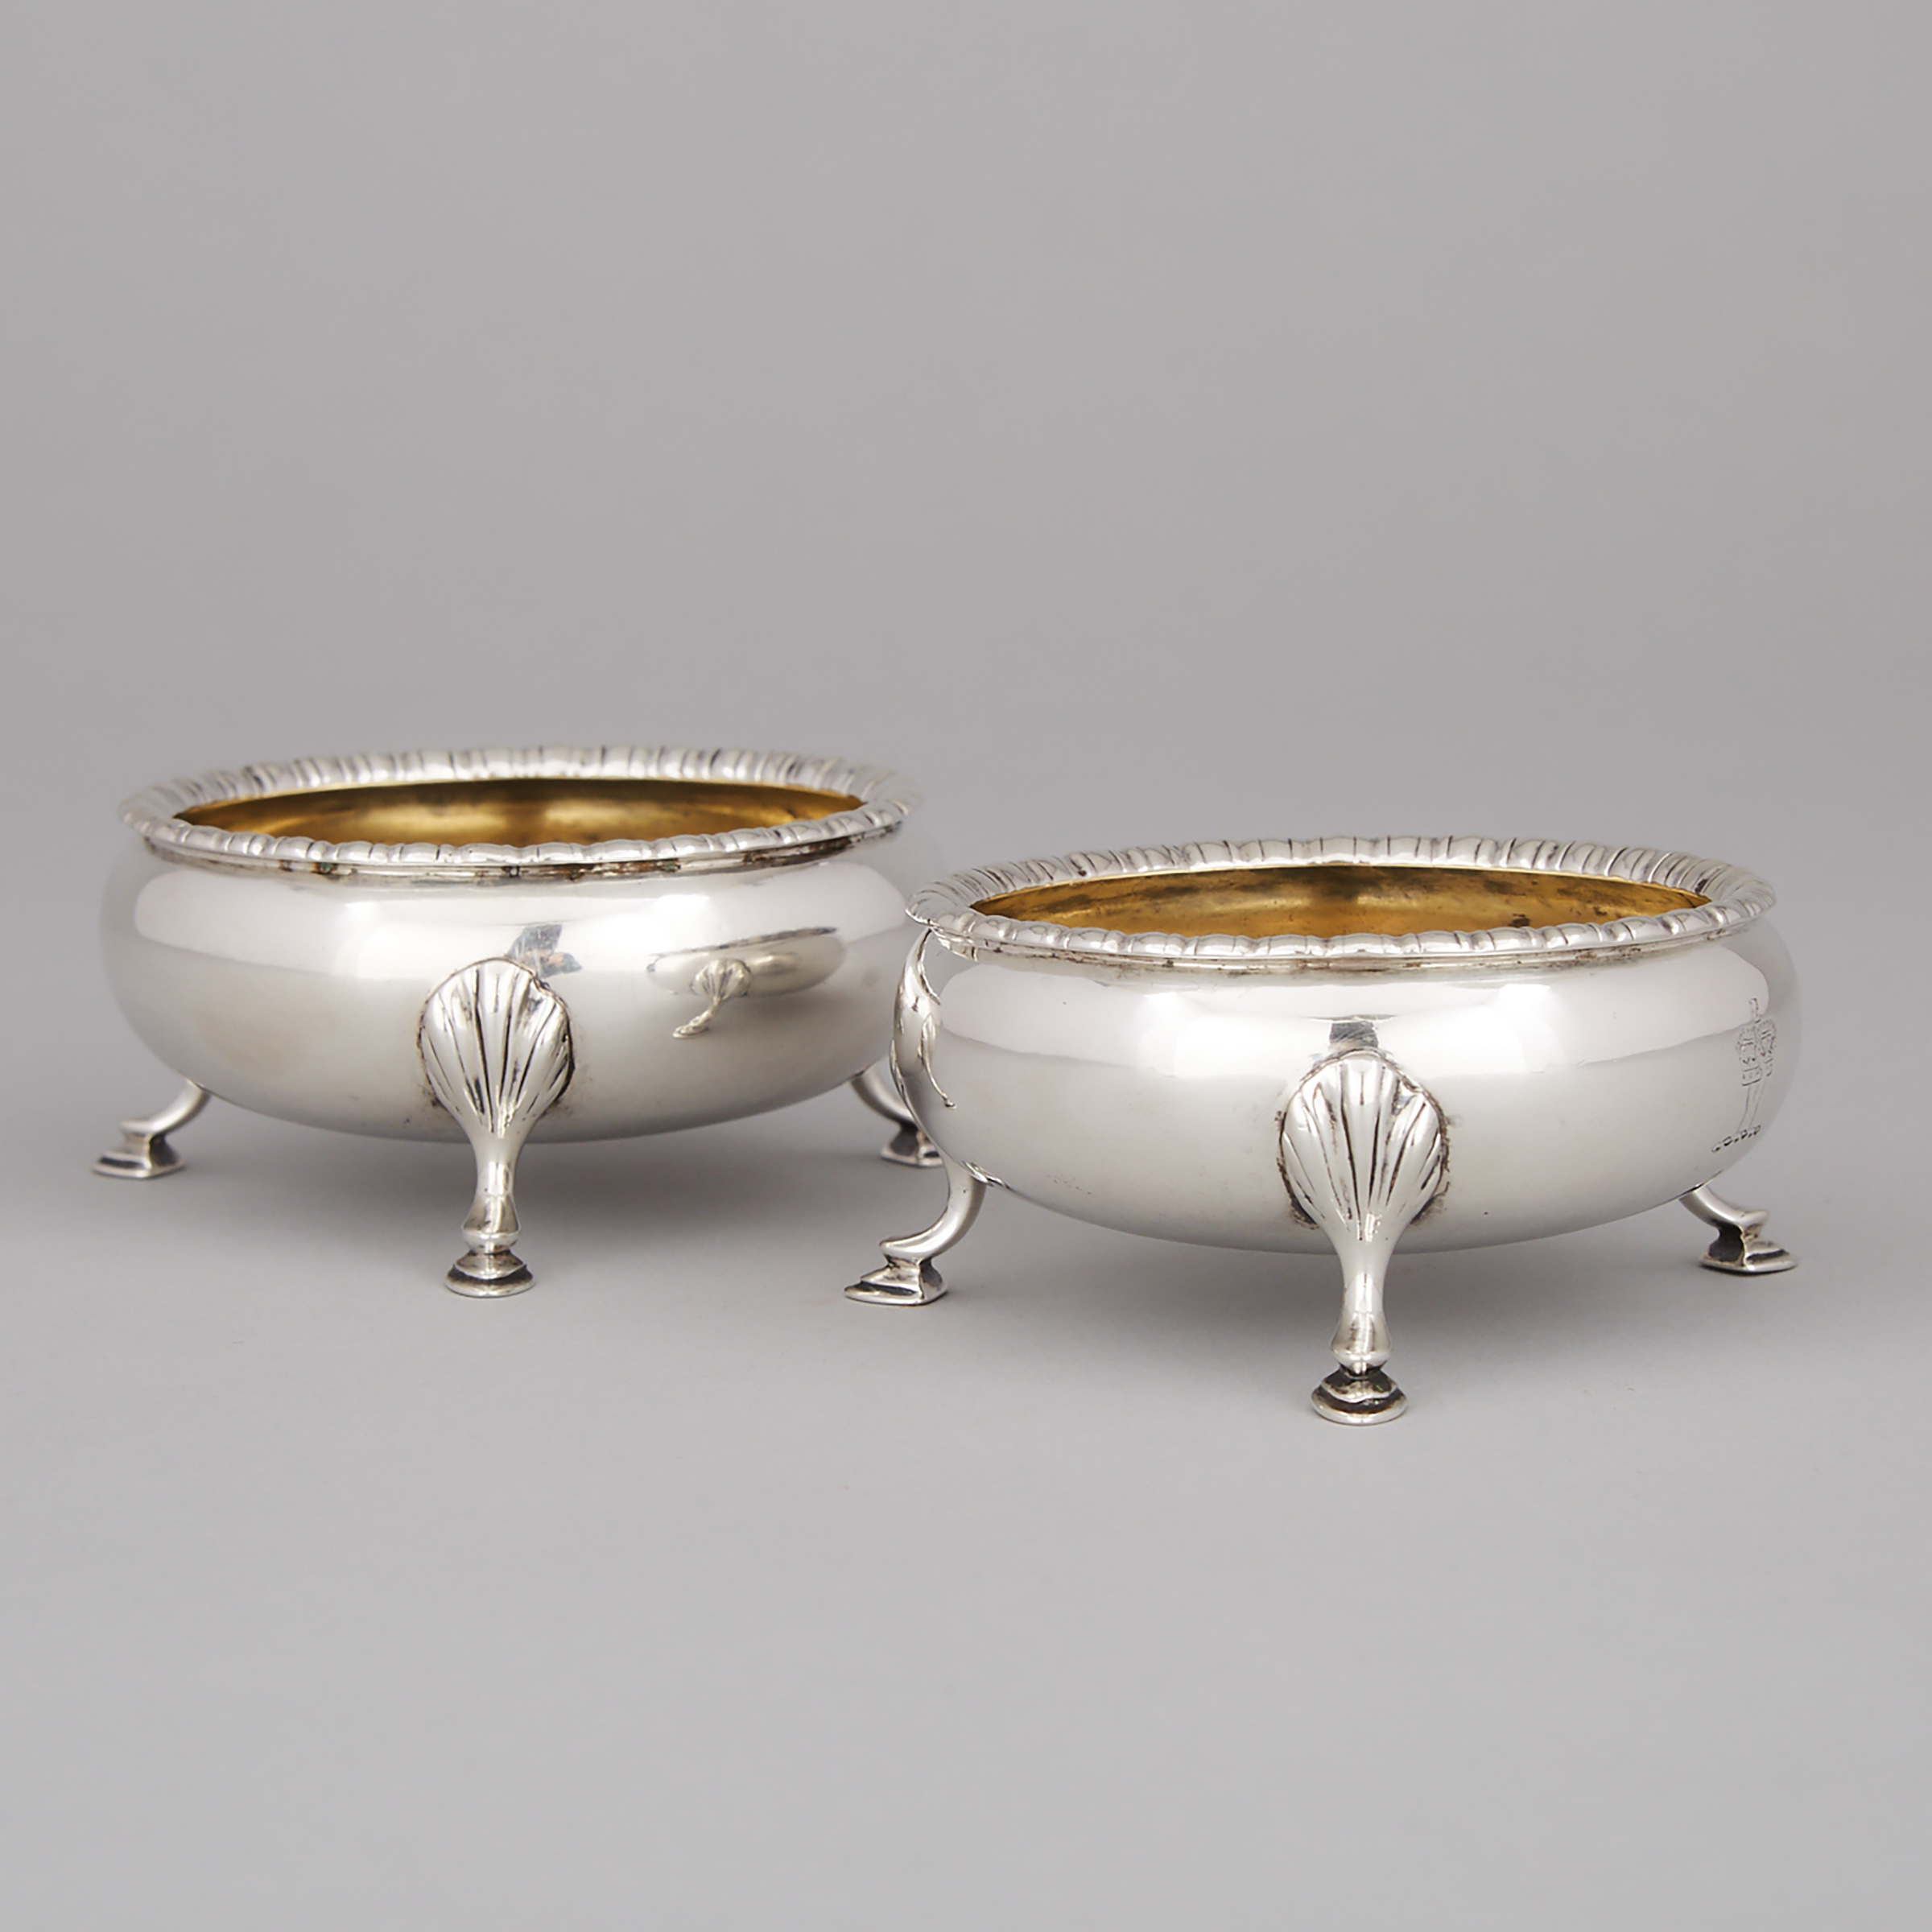 Pair of Canadian Silver Open Salts, John Wanless & Co., Toronto, Ont., late 19th century